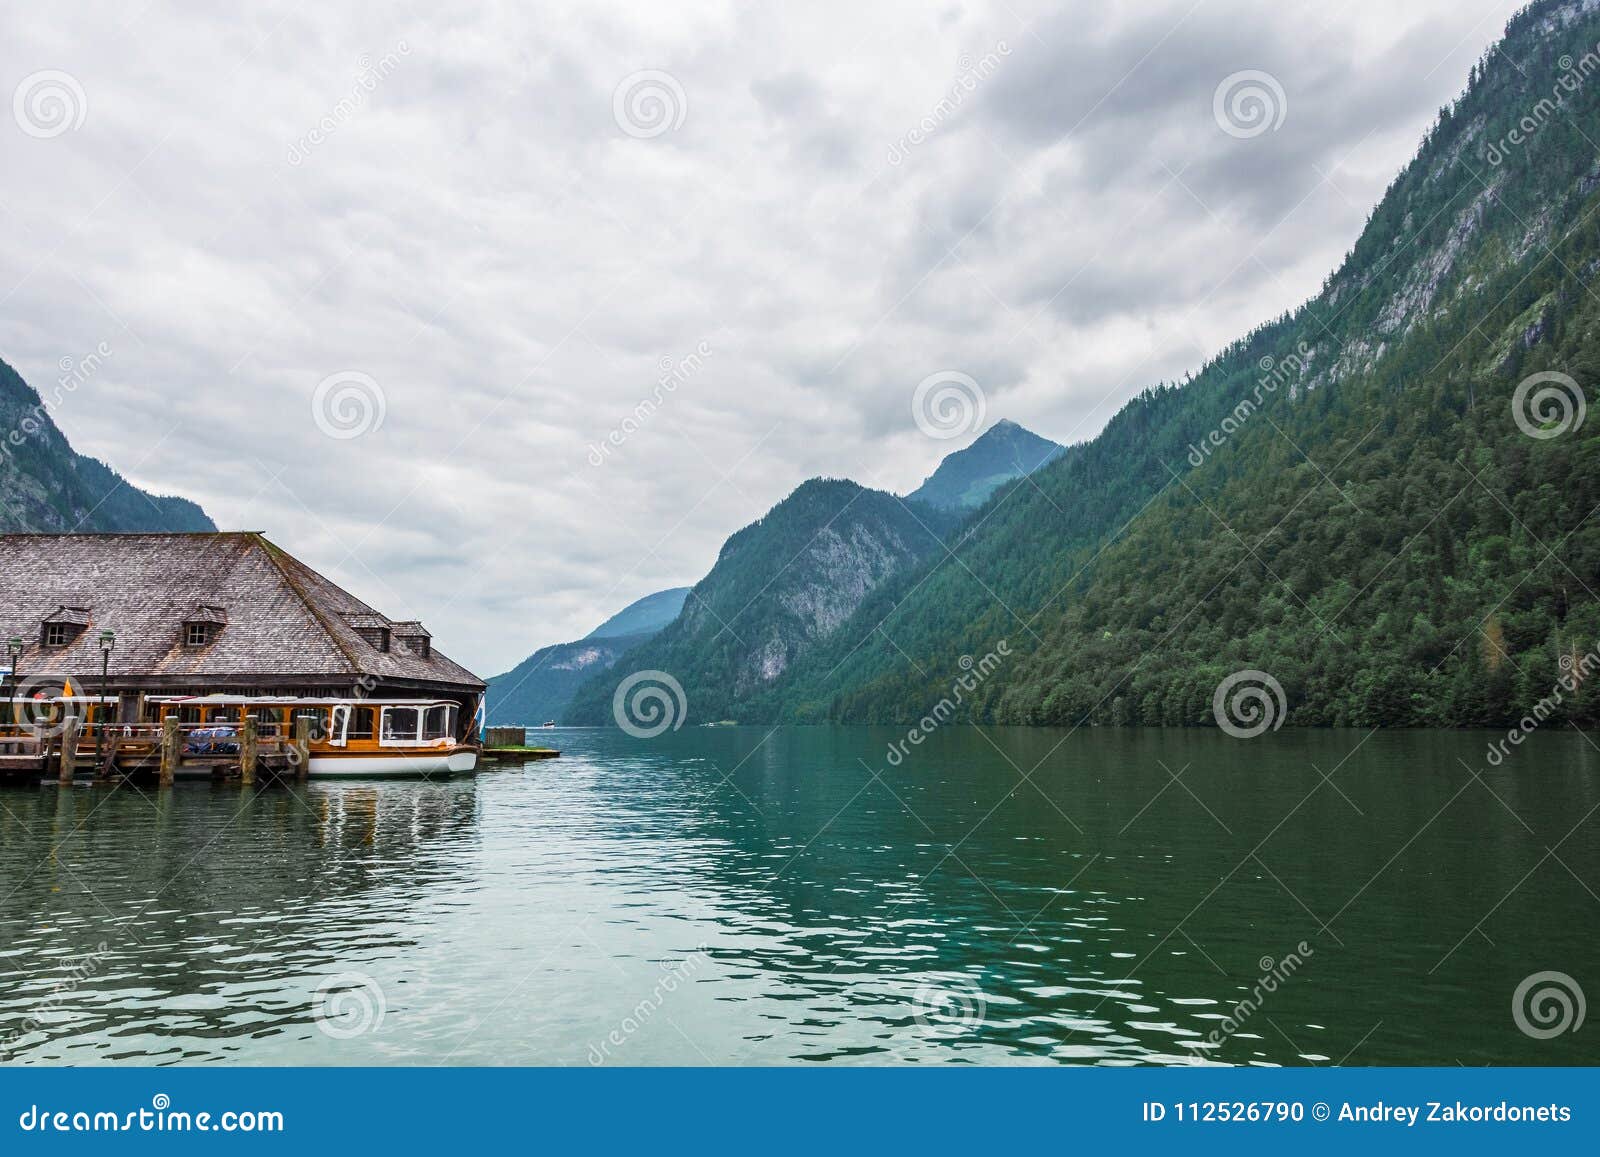 Wooden House In The Mountains In Konigssee Lake, Bavaria ...